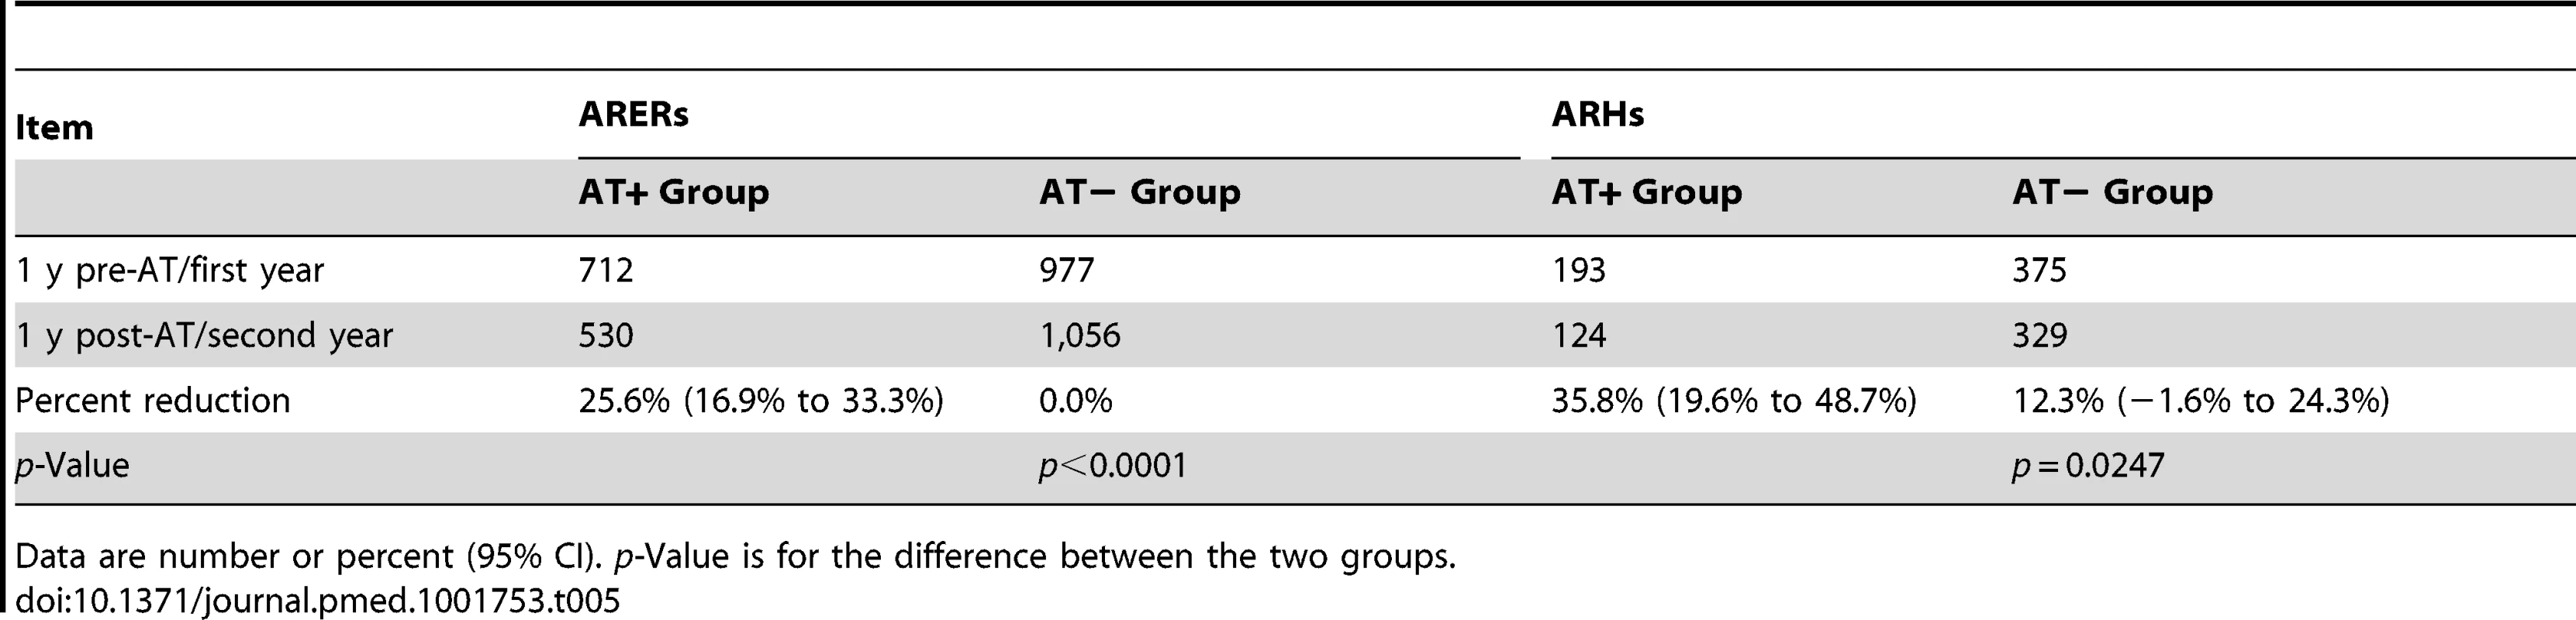 Annual frequency of asthma-related emergency room visits and asthma-related hospitalizations: comparing adenotonsillectomy to no adenotonsillectomy.